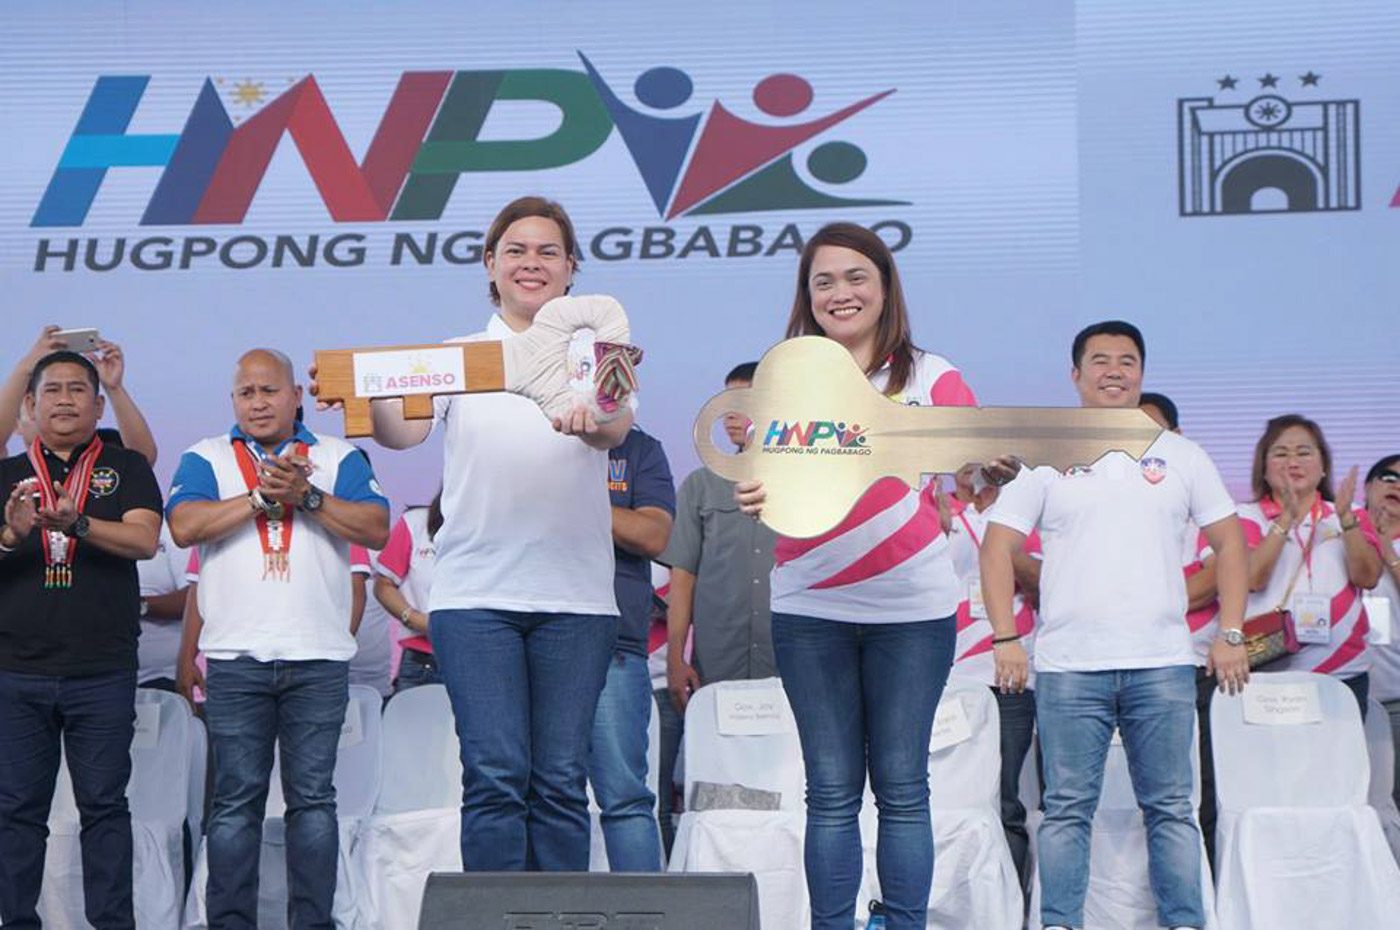 Sara Duterte’s Hugpong joins forces with Abra’s Asenso party